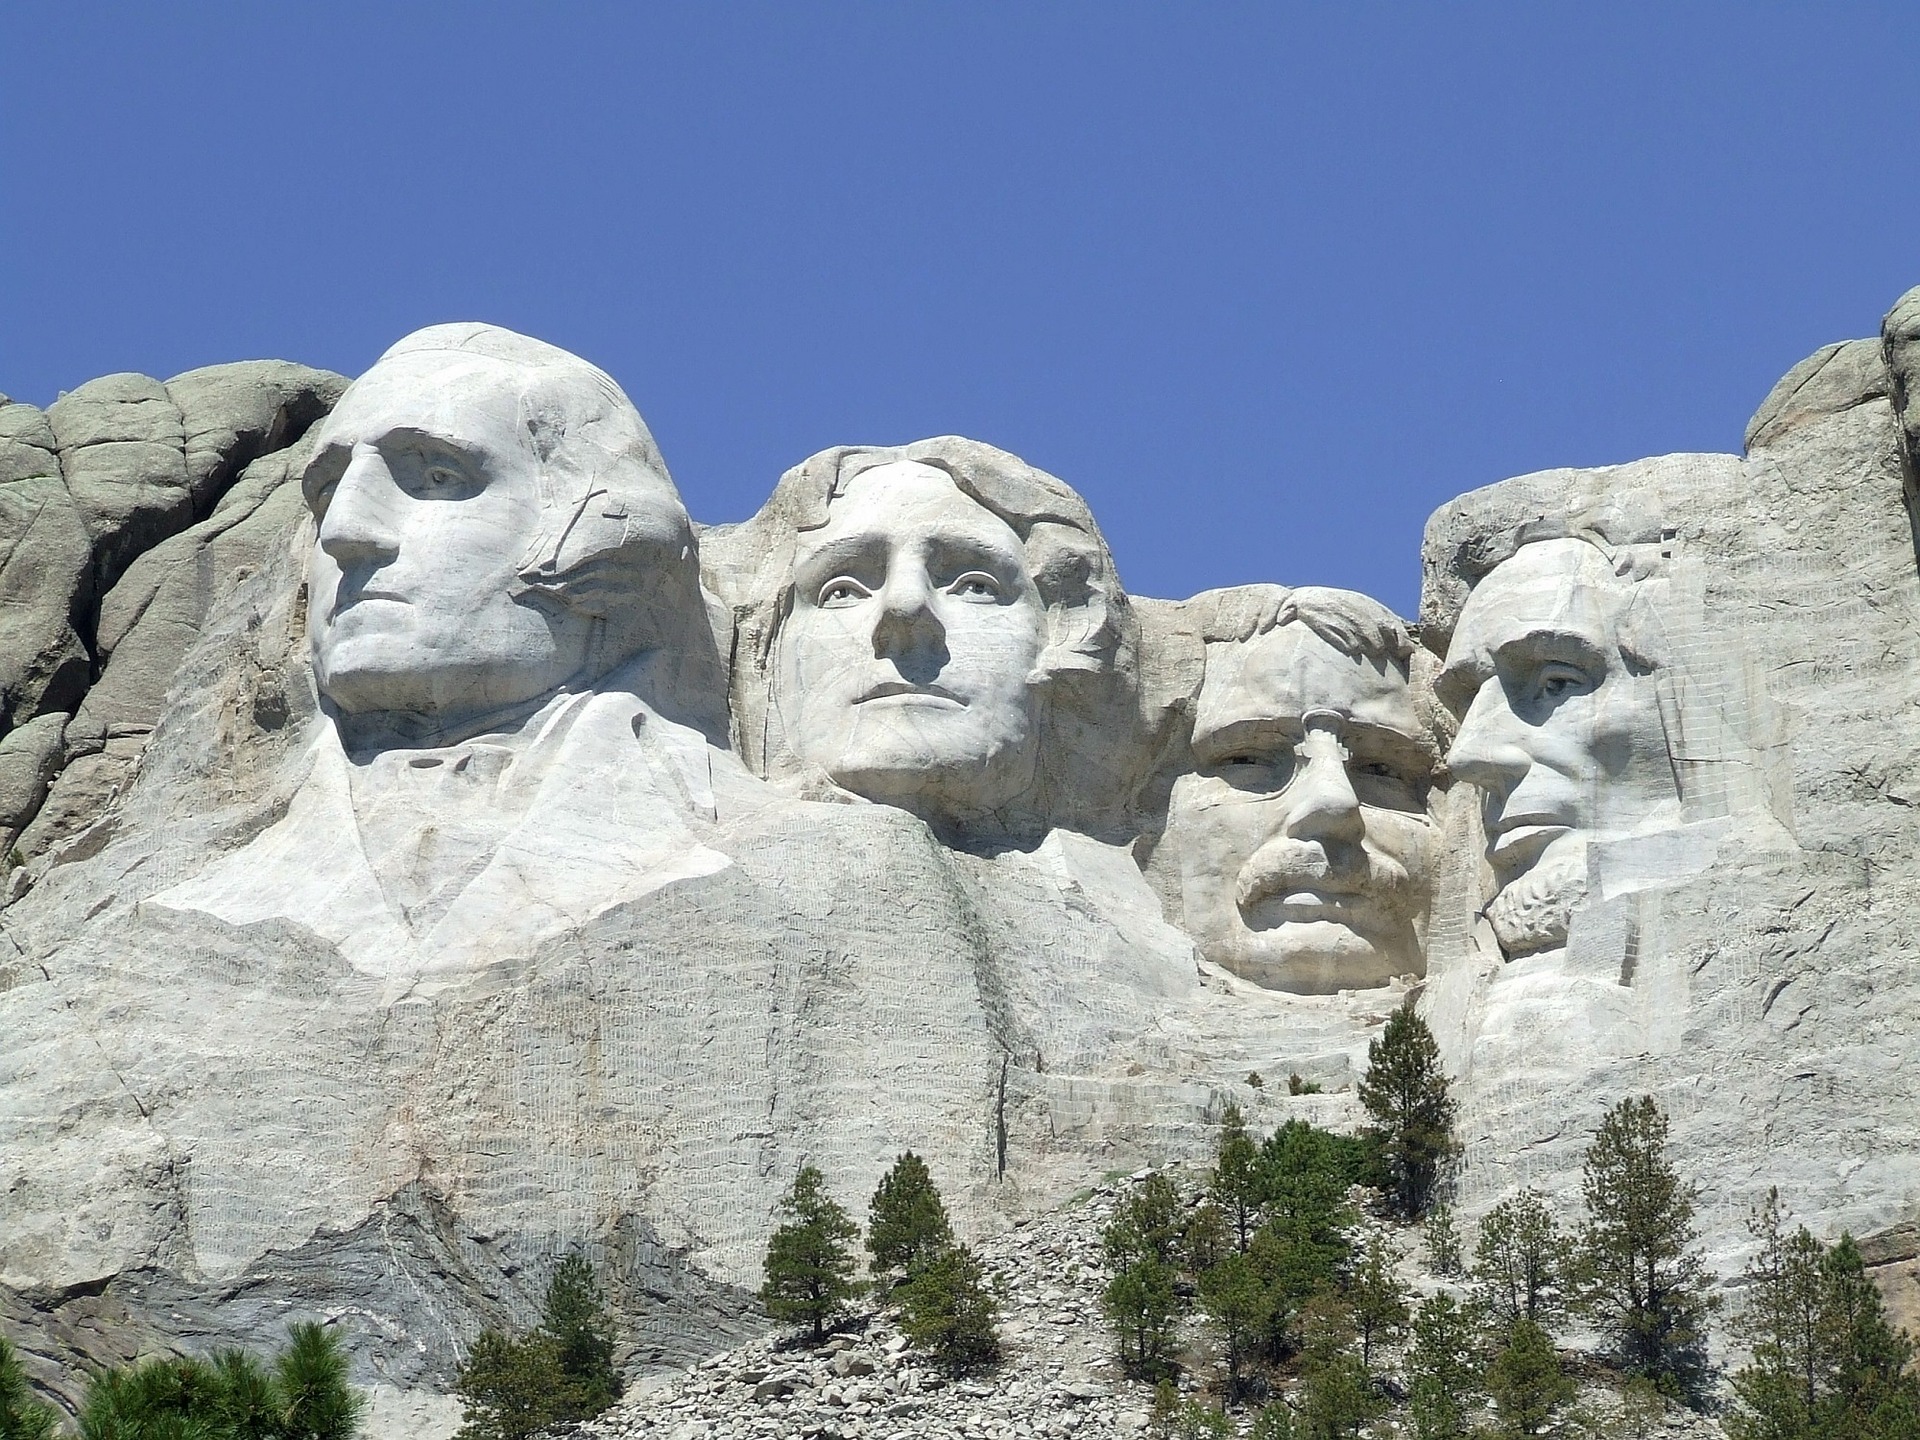 Four presidents carved into stone in a mountain.